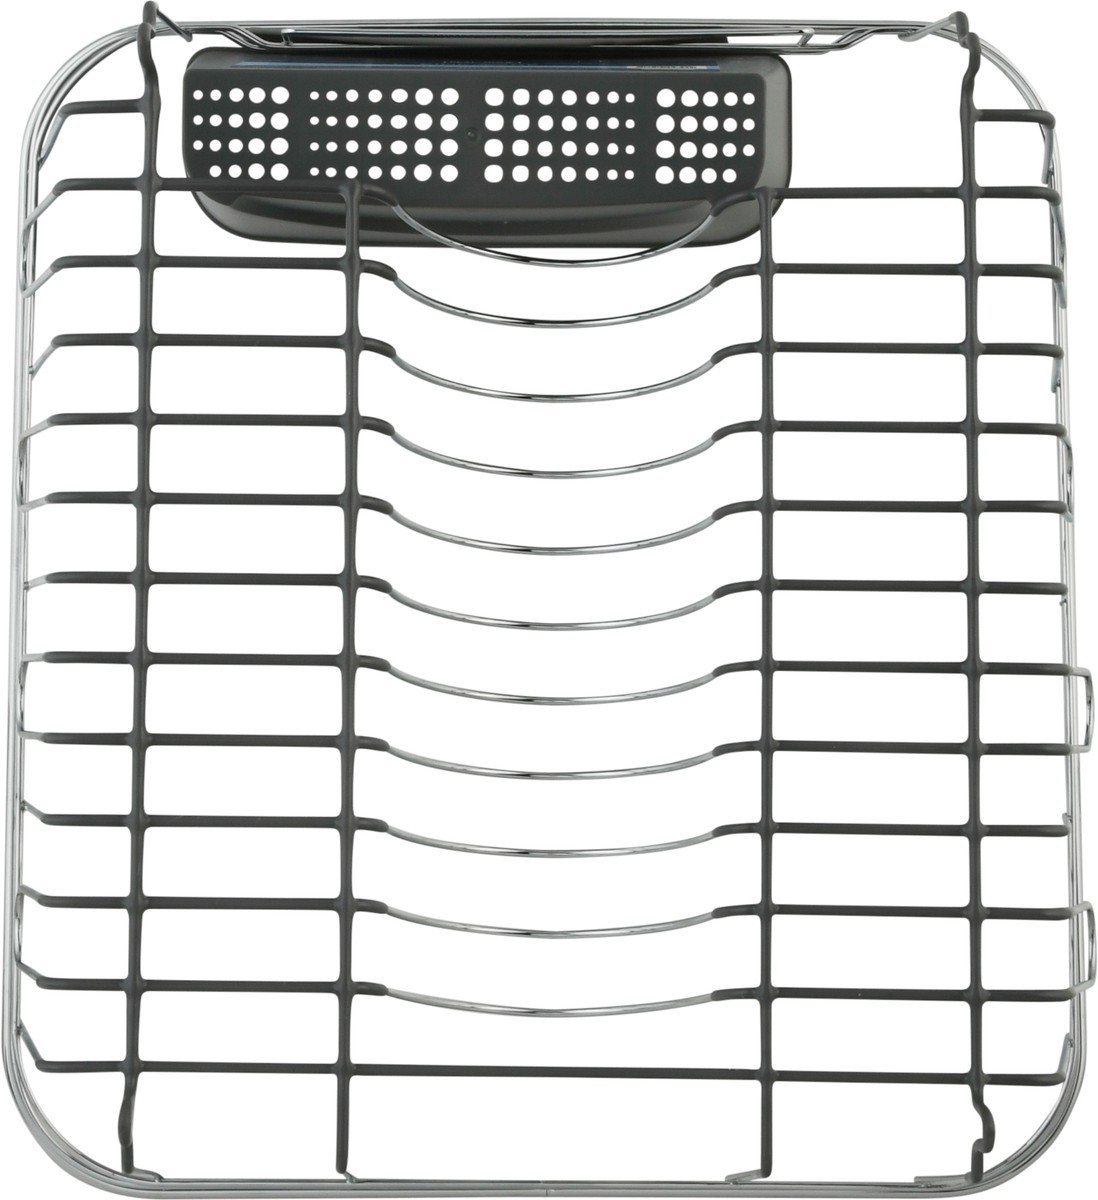 Real Home Innovations Deluxe Small Dish Drainer, Black Chrome